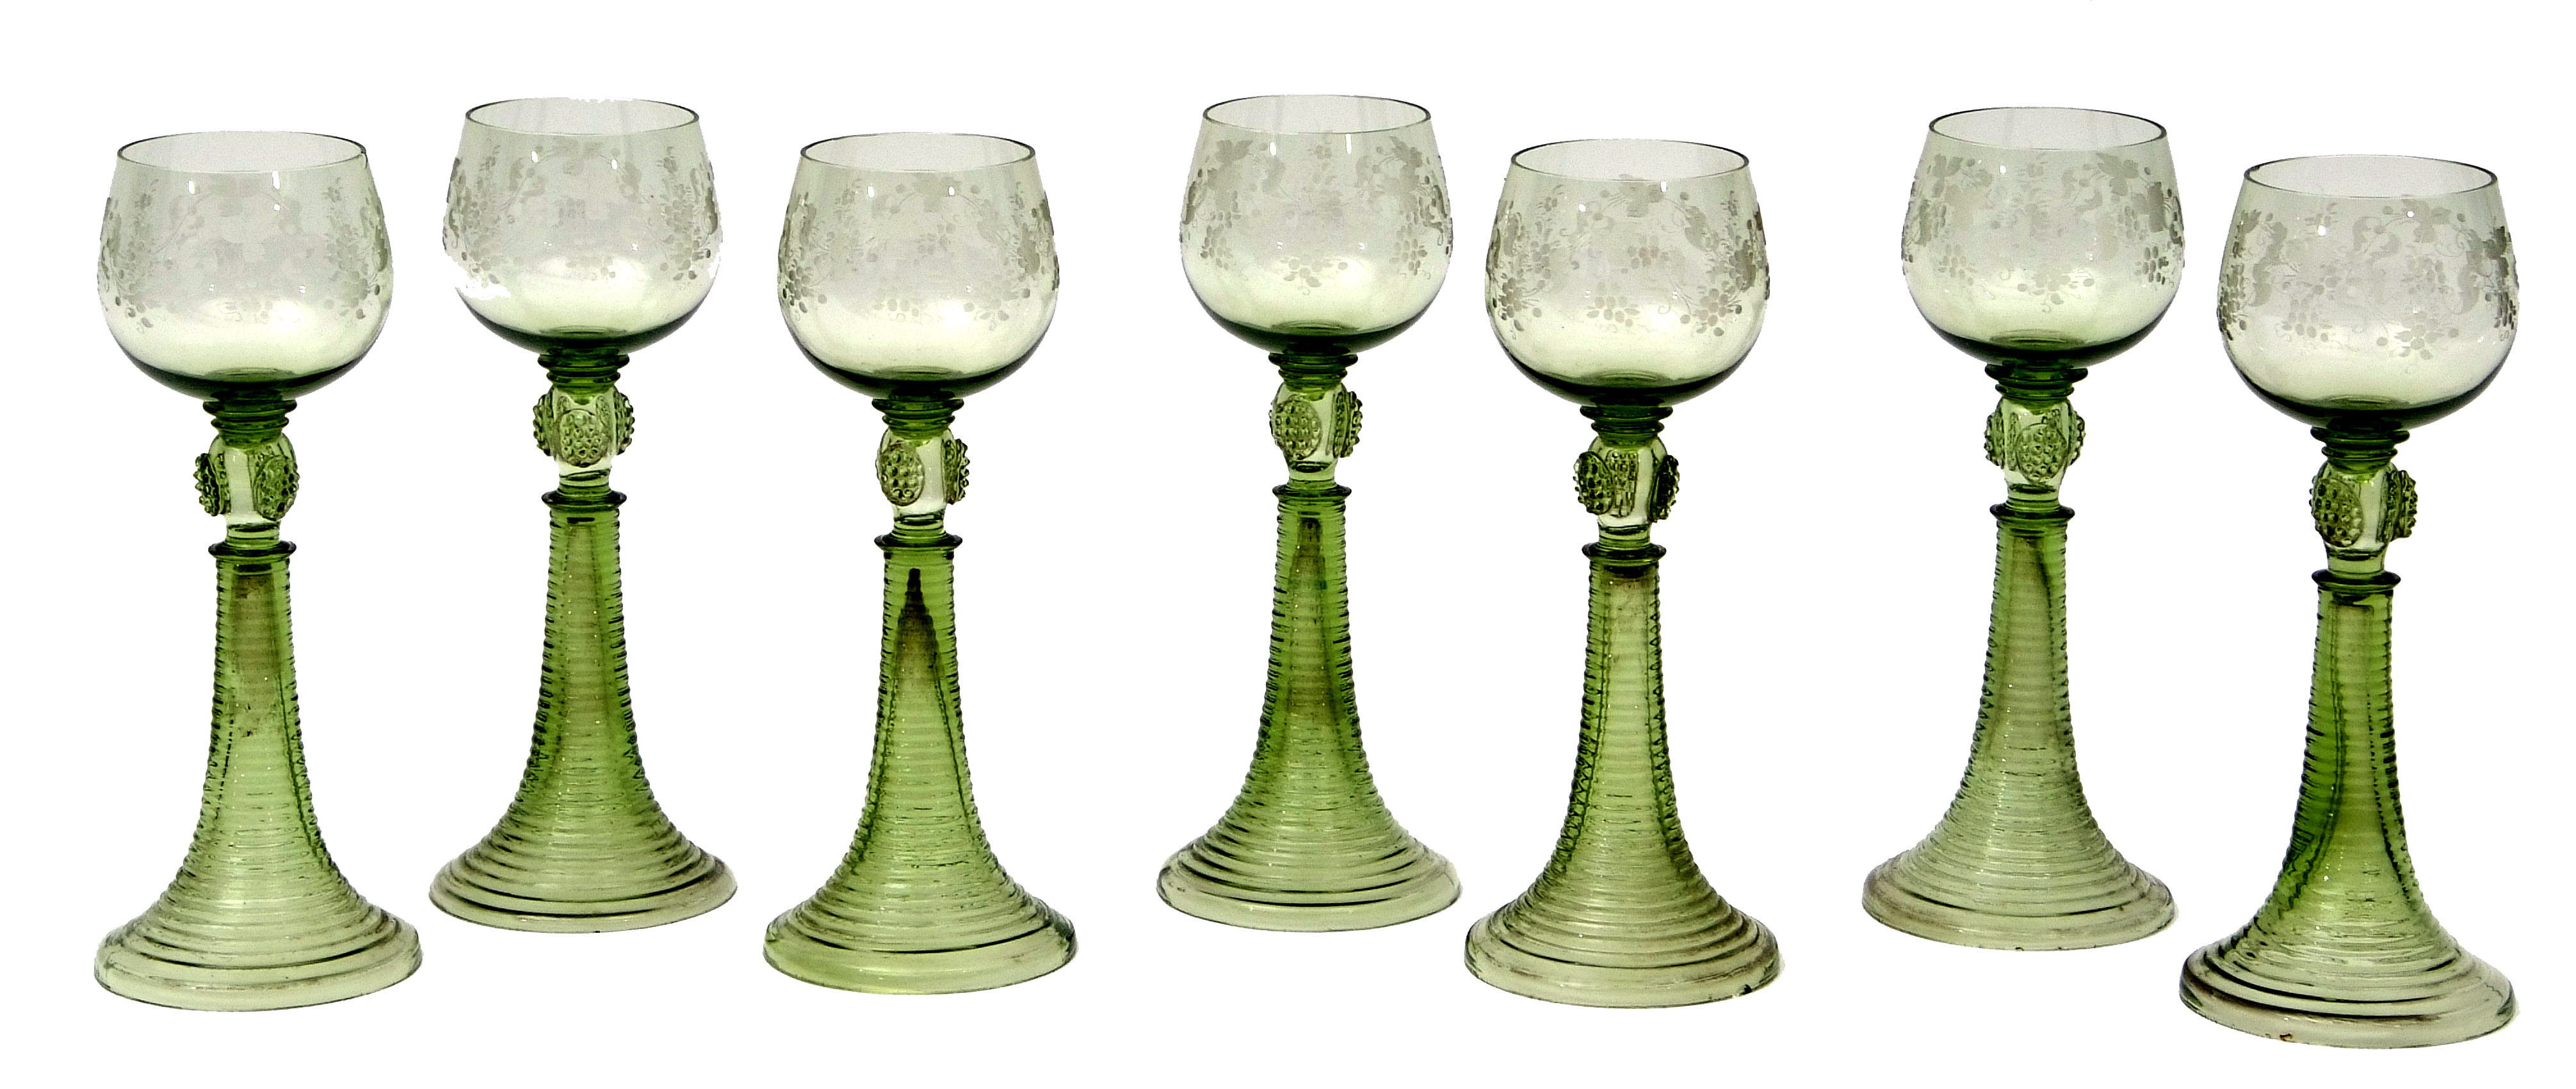 Group of seven Bohemian wine glasses, the bowls engraved with a fruiting vine design above a stem - Image 3 of 5